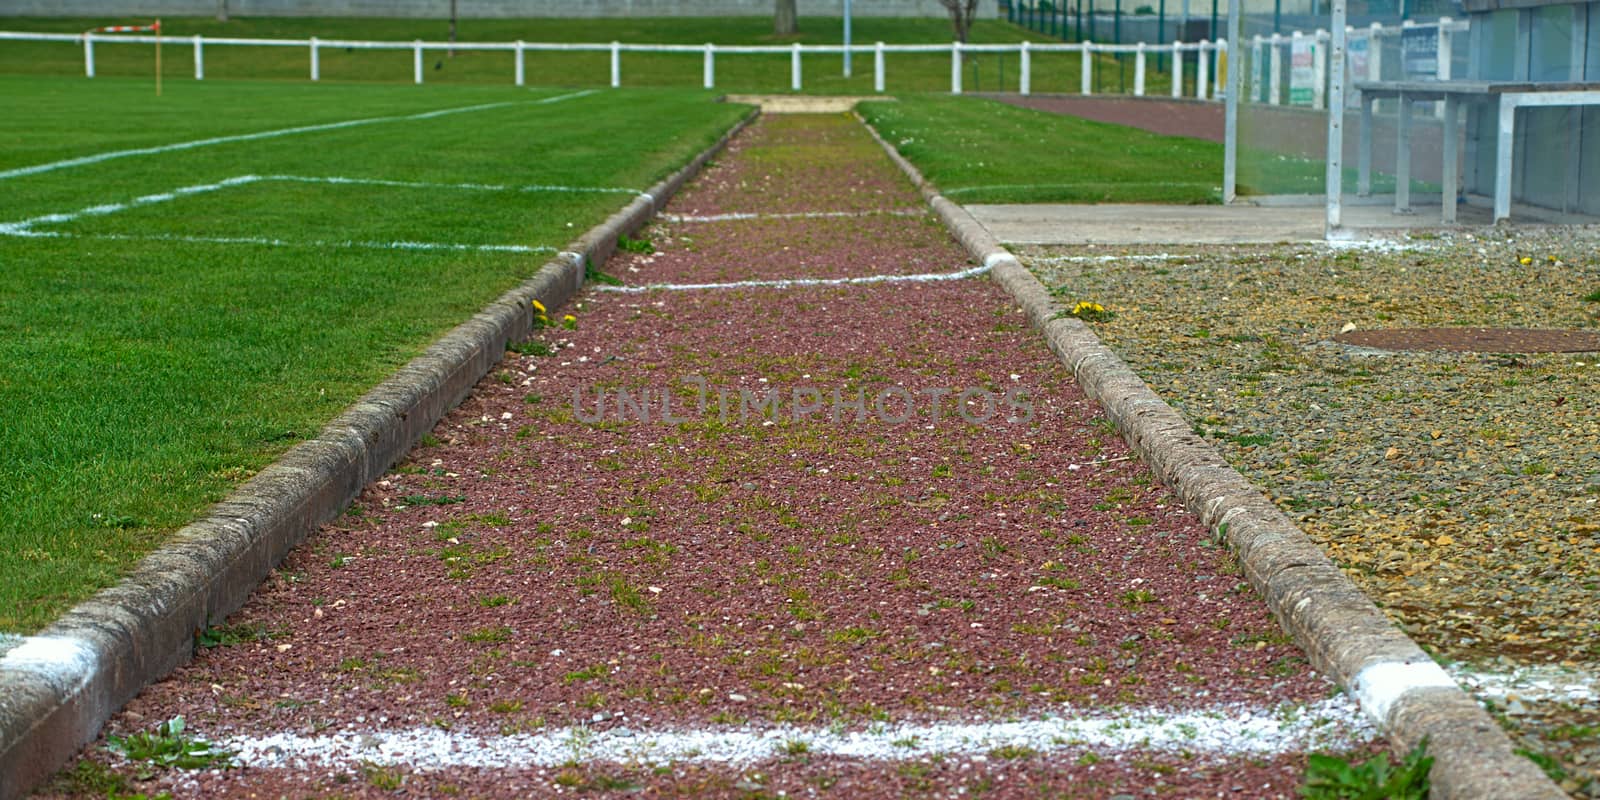 Long jump path on a stadium, front view